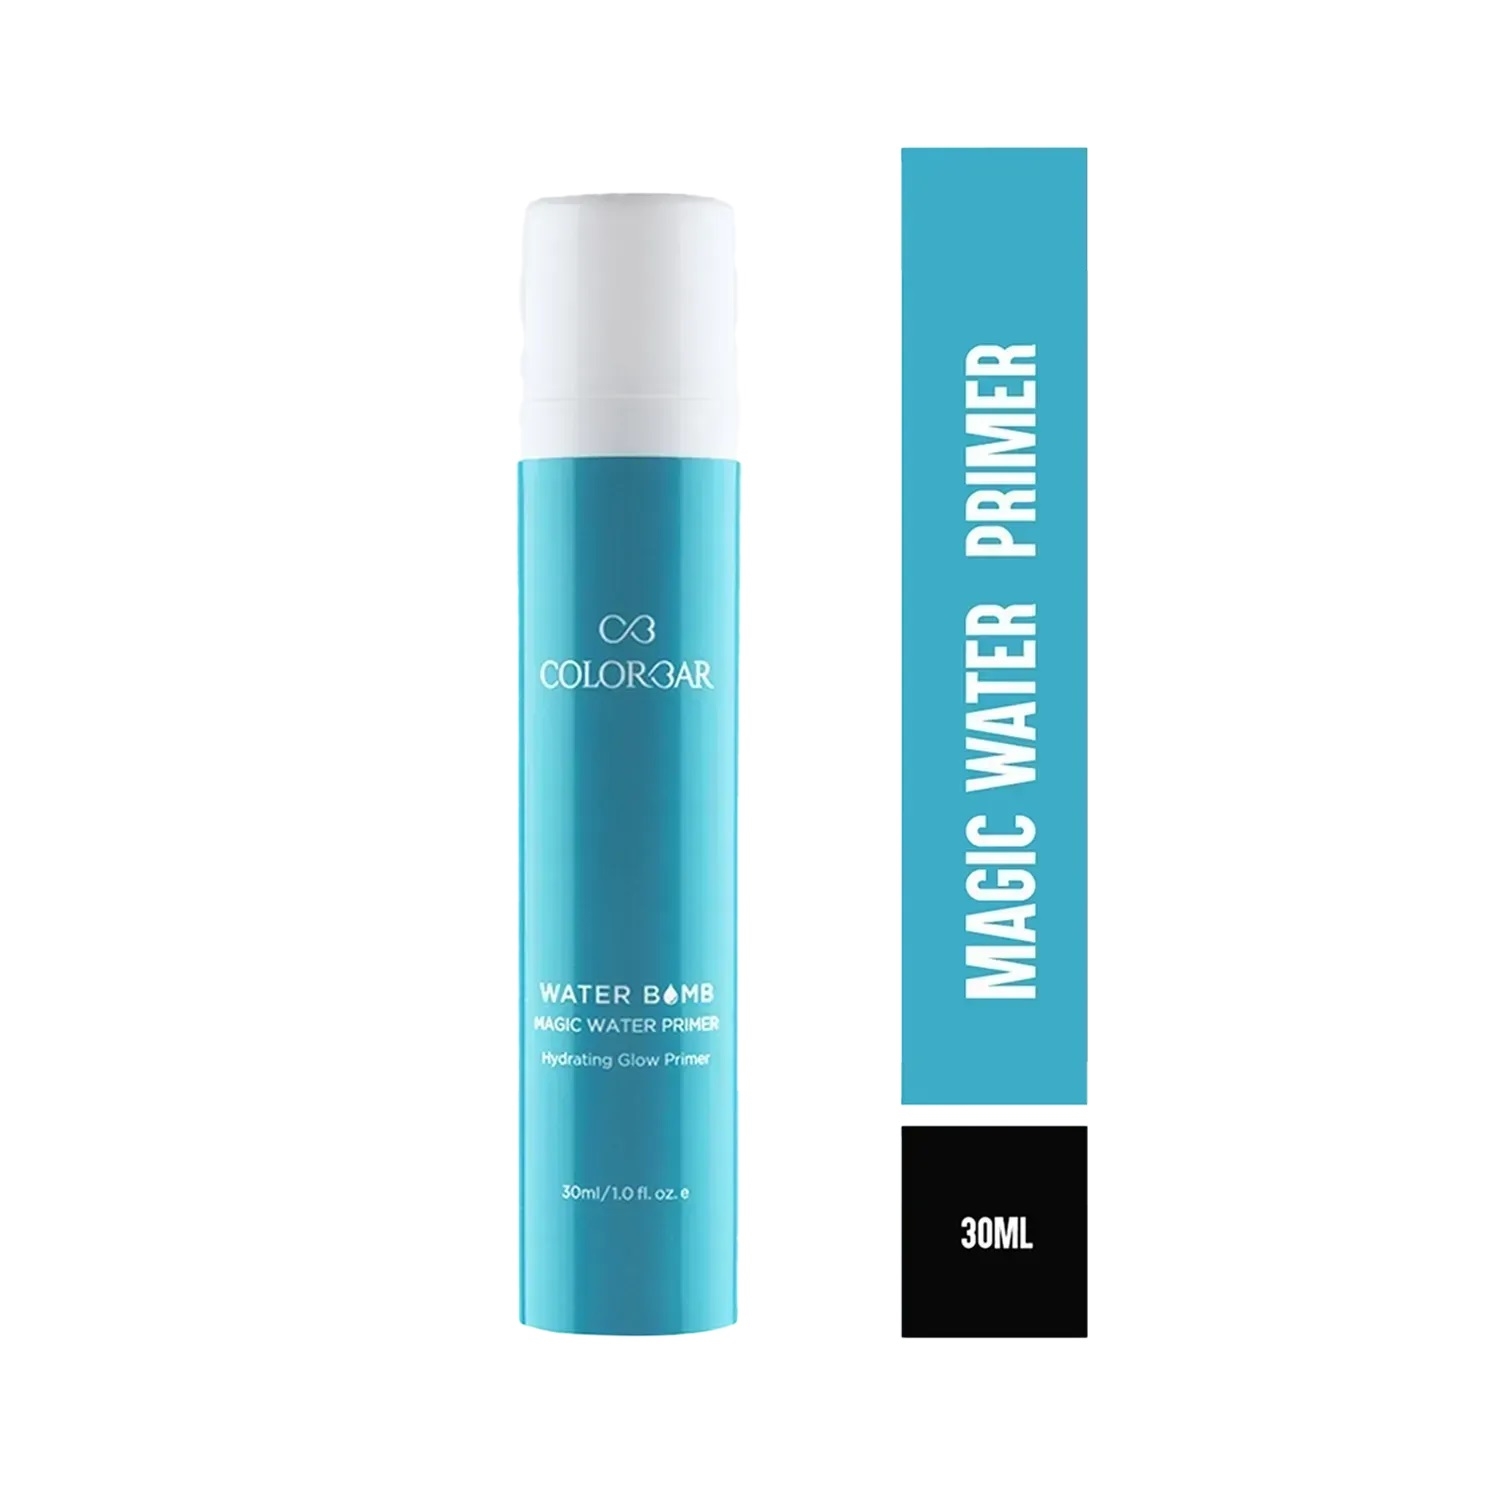 Colorbar | Colorbar Water Bomb Collection Primer Water (30ml)